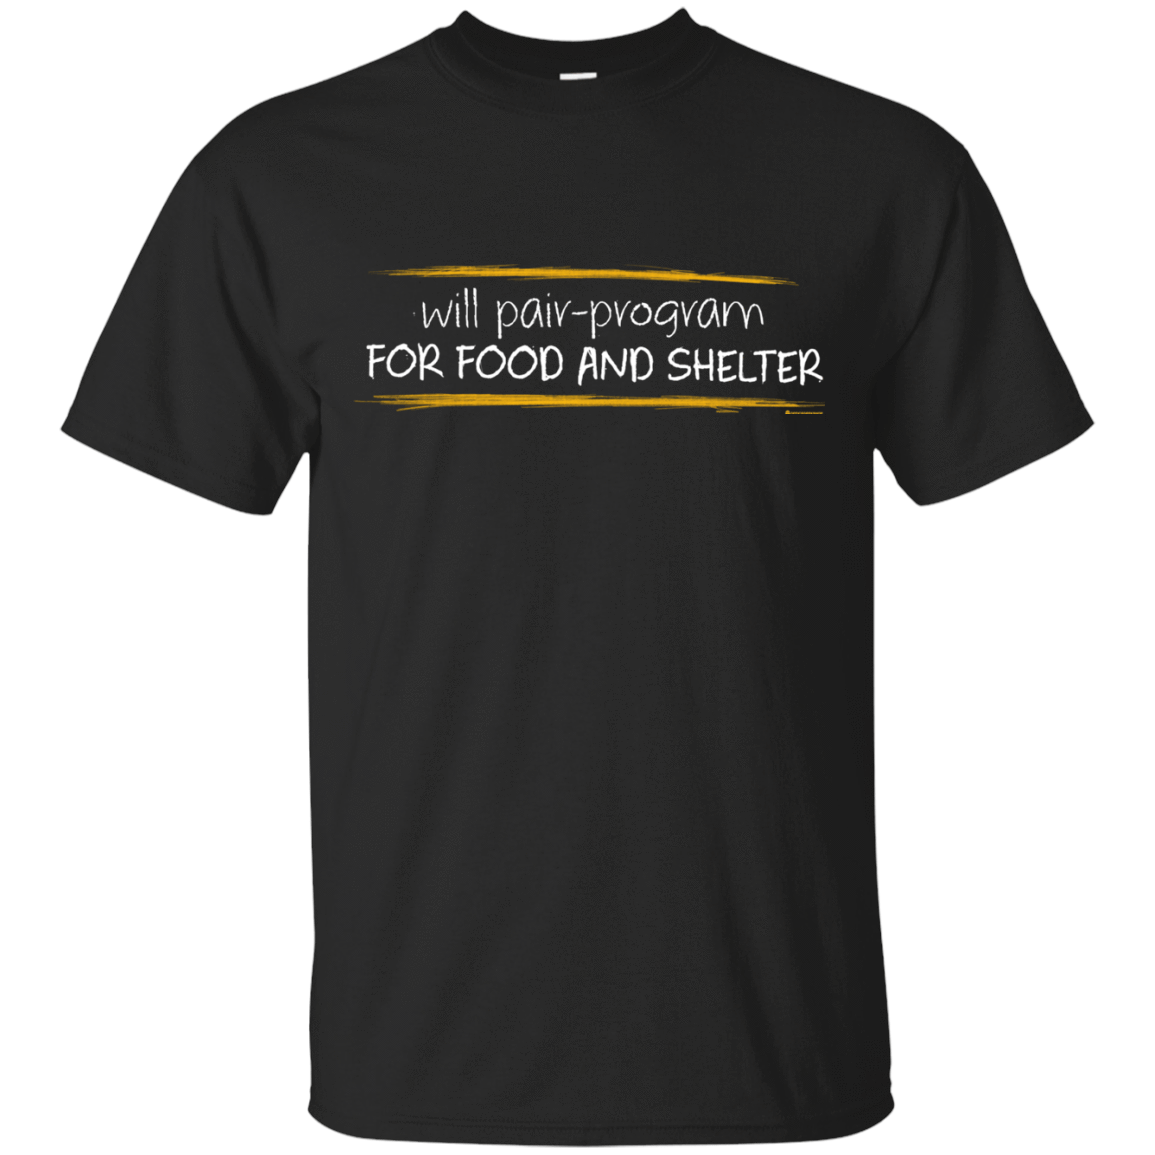 T-Shirts Black / Small Pair Programming For Food And Shelter T-Shirt